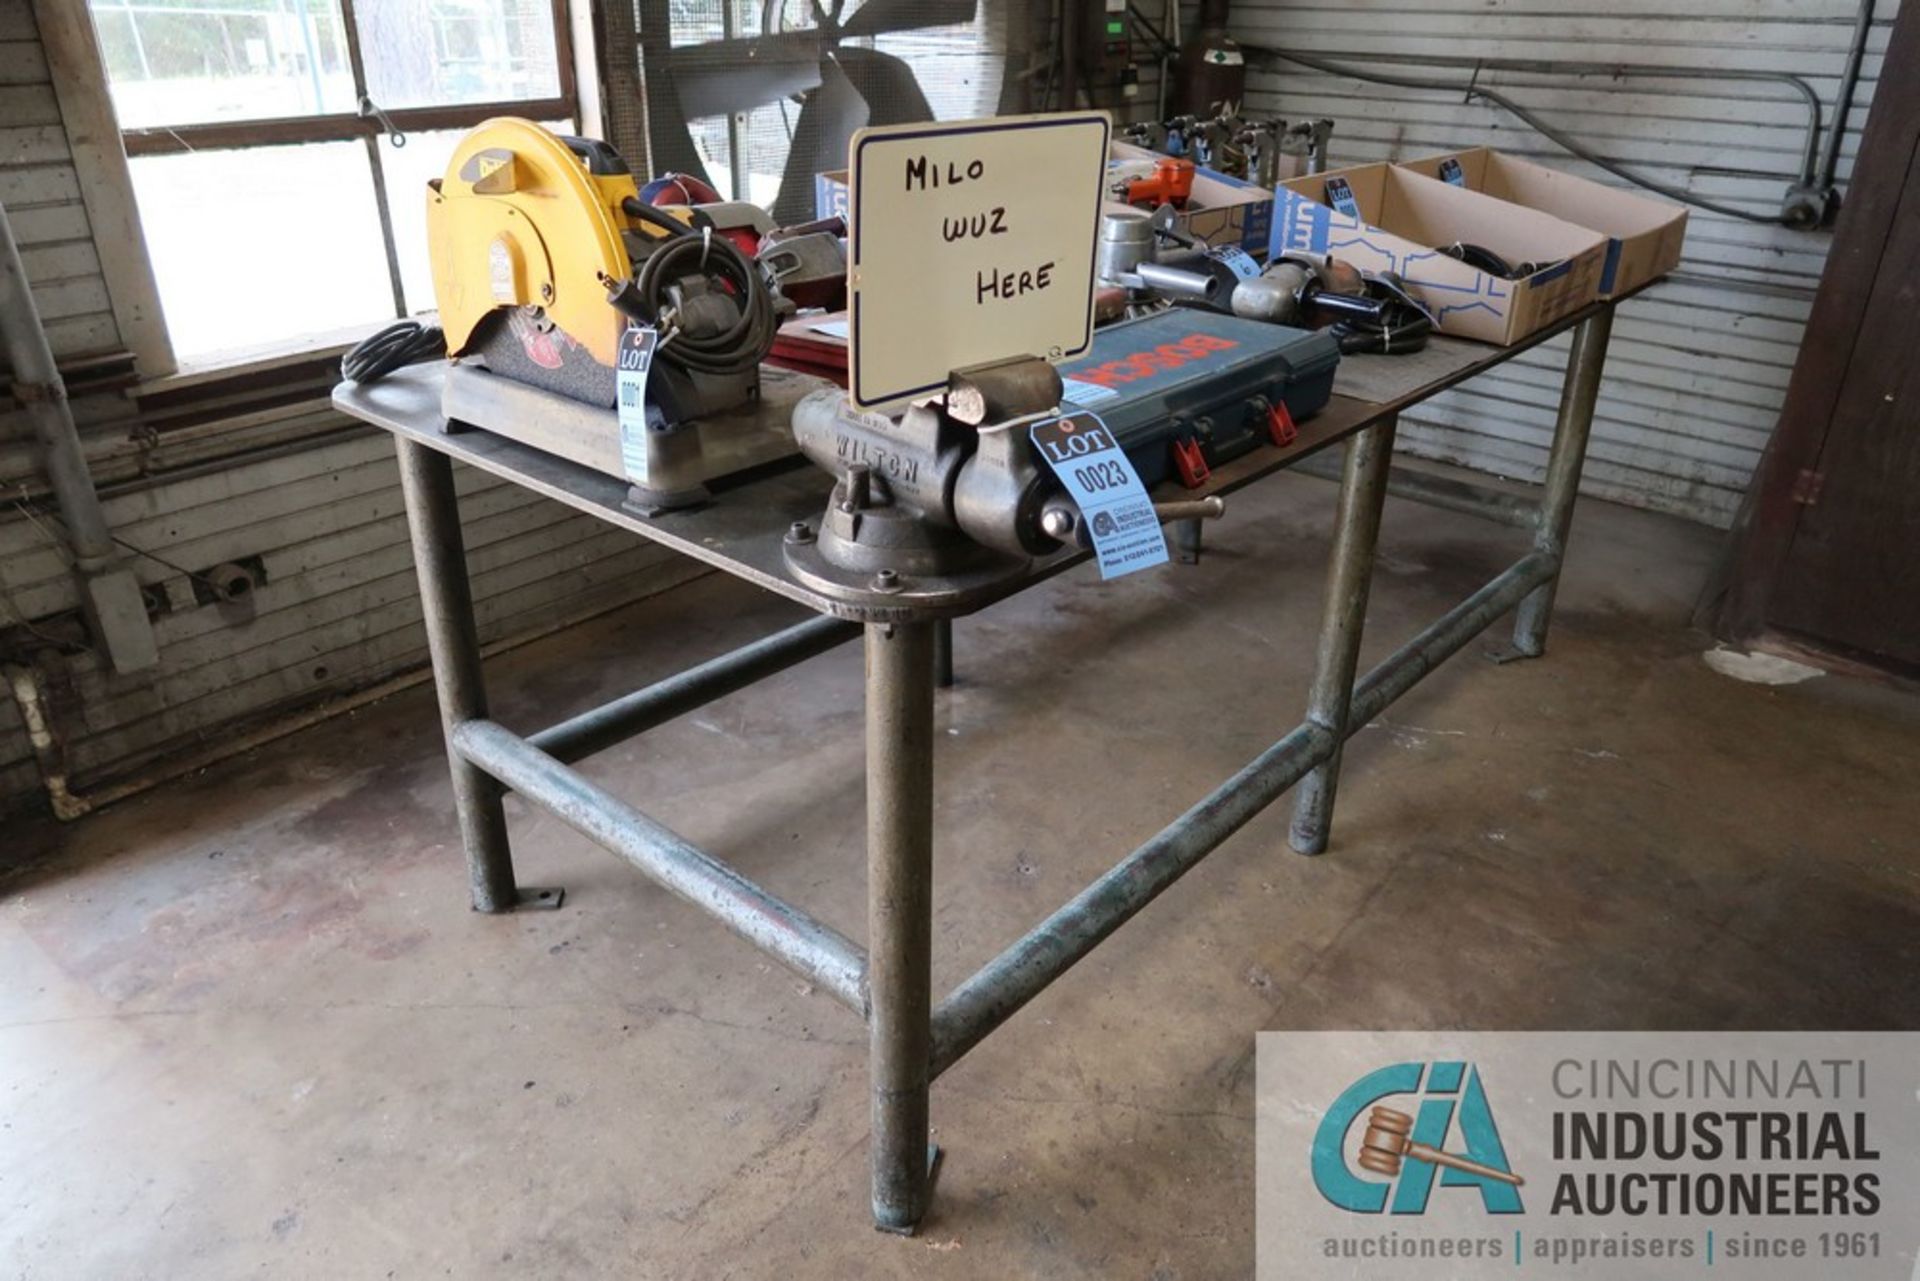 48" X 96" X 37" OVERALL HEIGHT AND 1/2" THICK STEEL TOP PLATE SIX POST WELDER STEEL TABLE WITH 4"